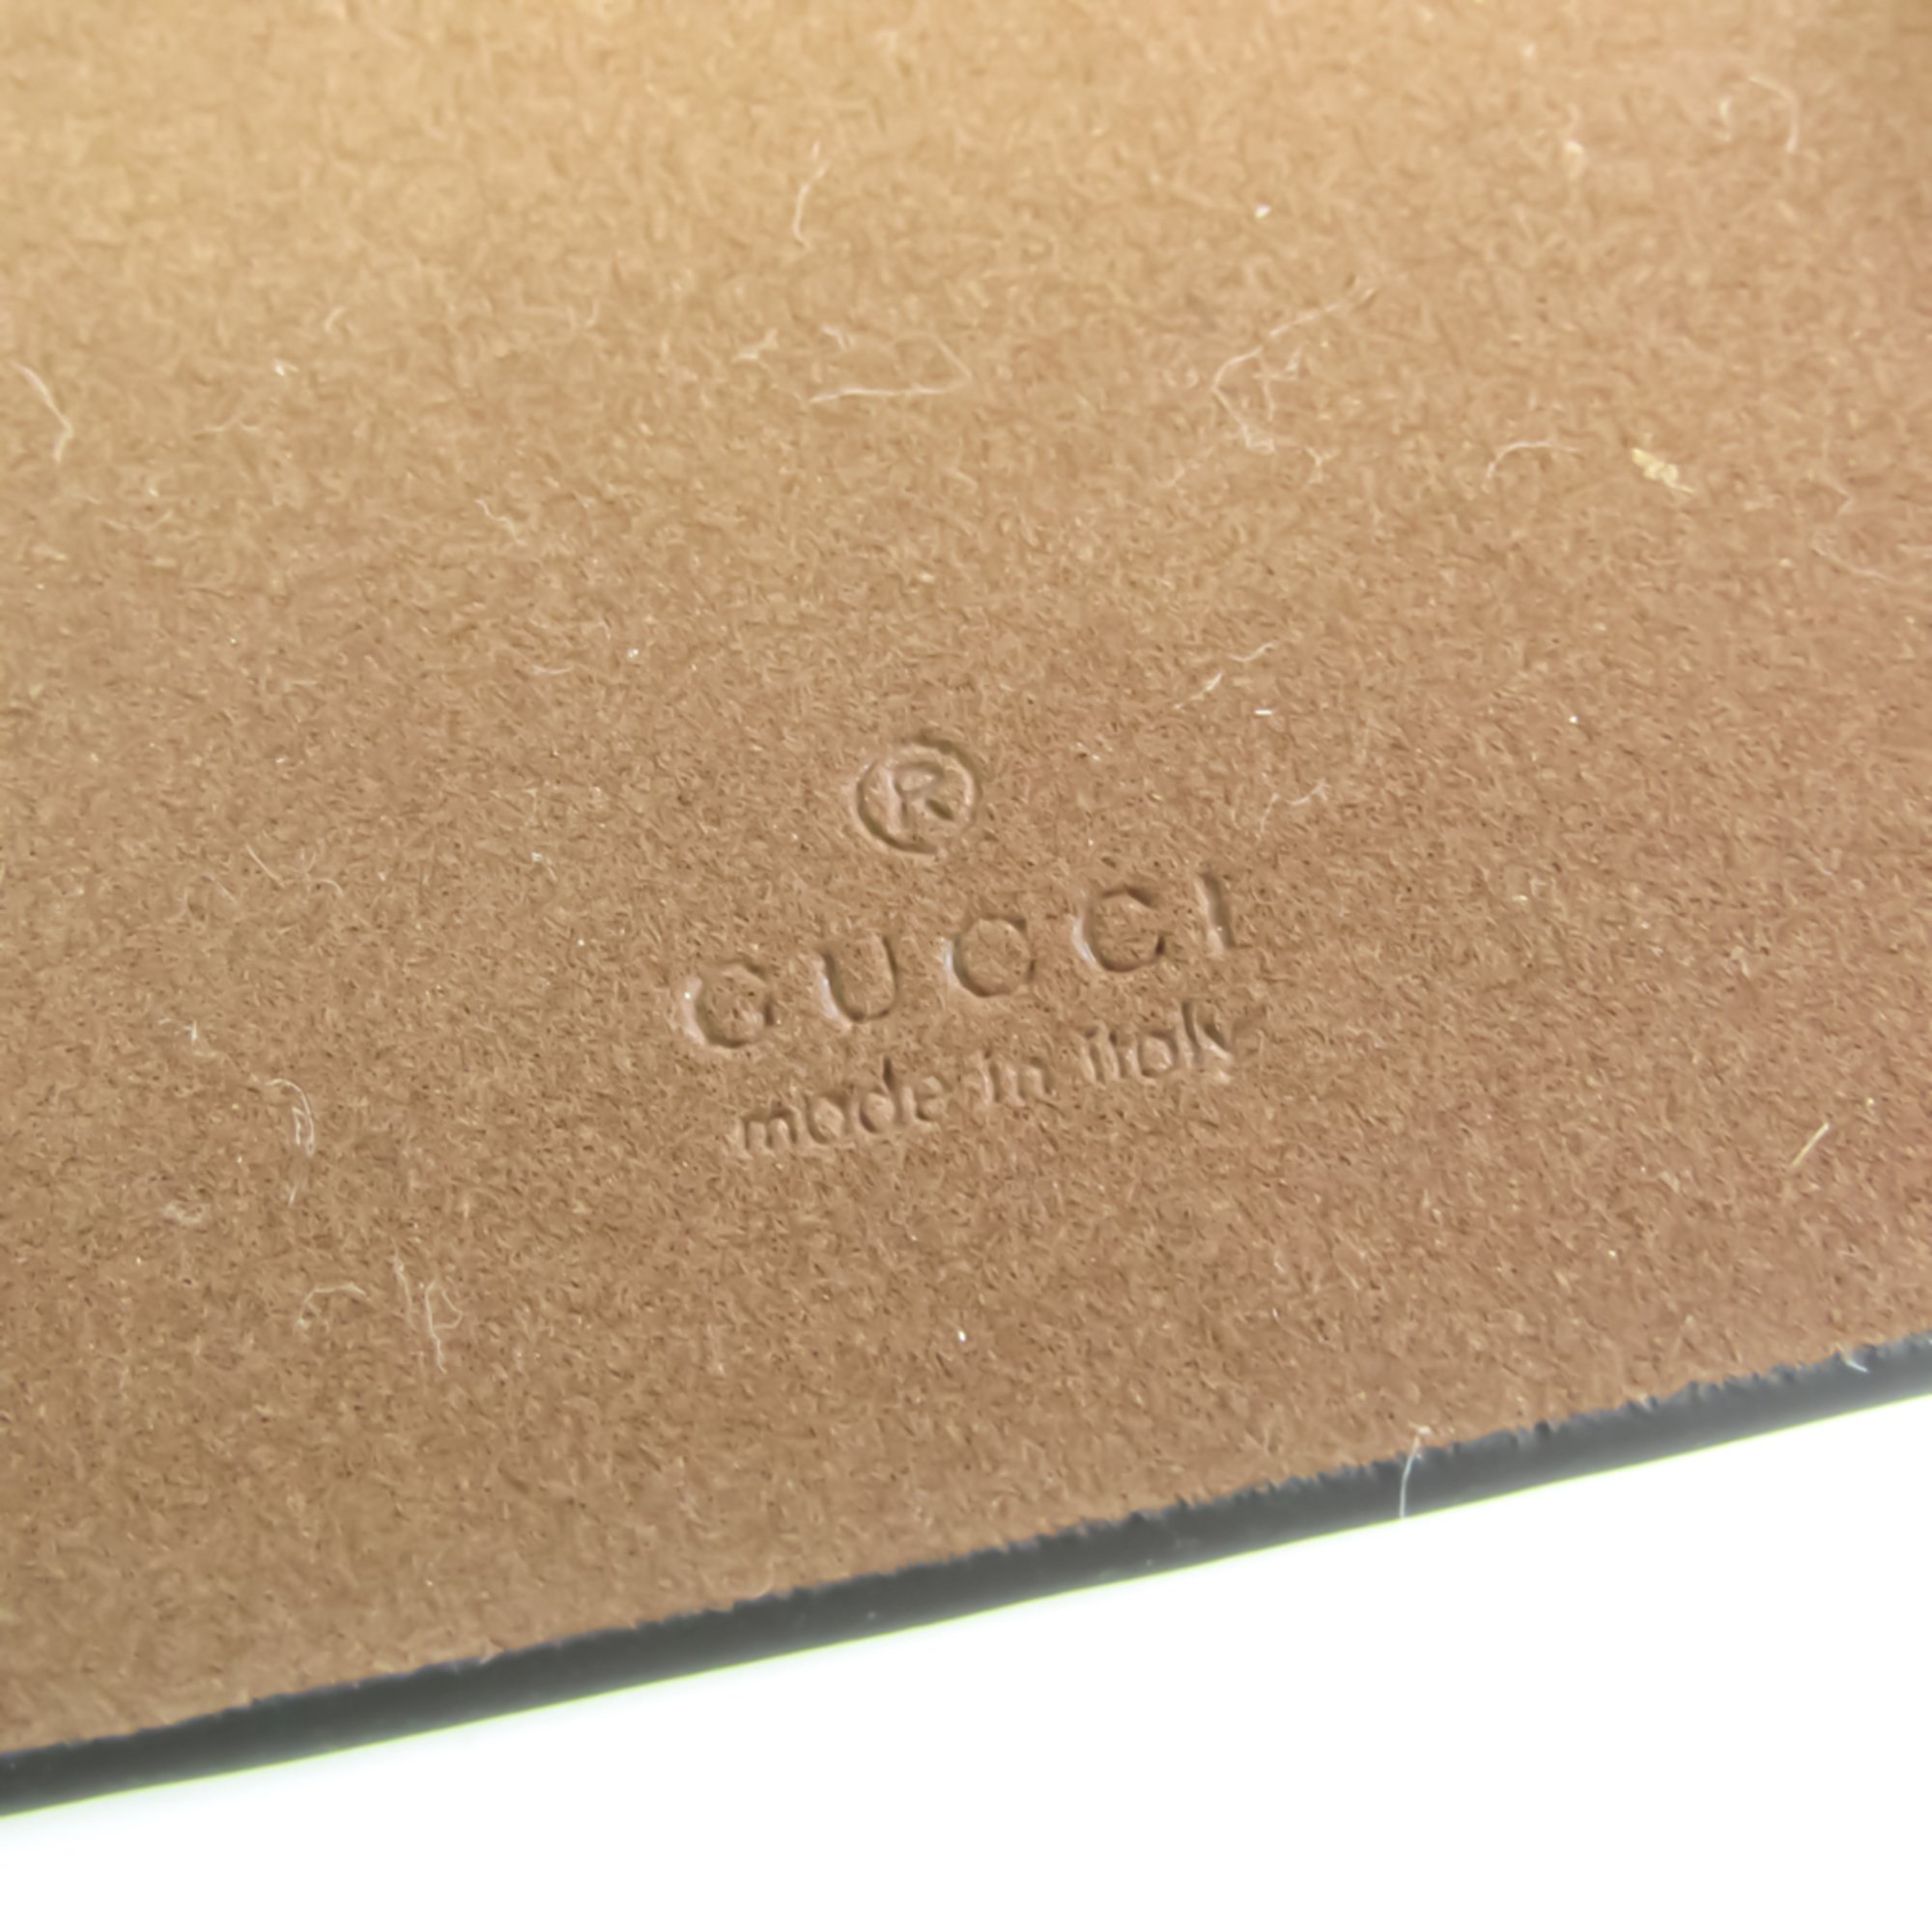 Gucci Coated Canvas Phone Bumper For IPhone 6 Plus Beige GG Supreme